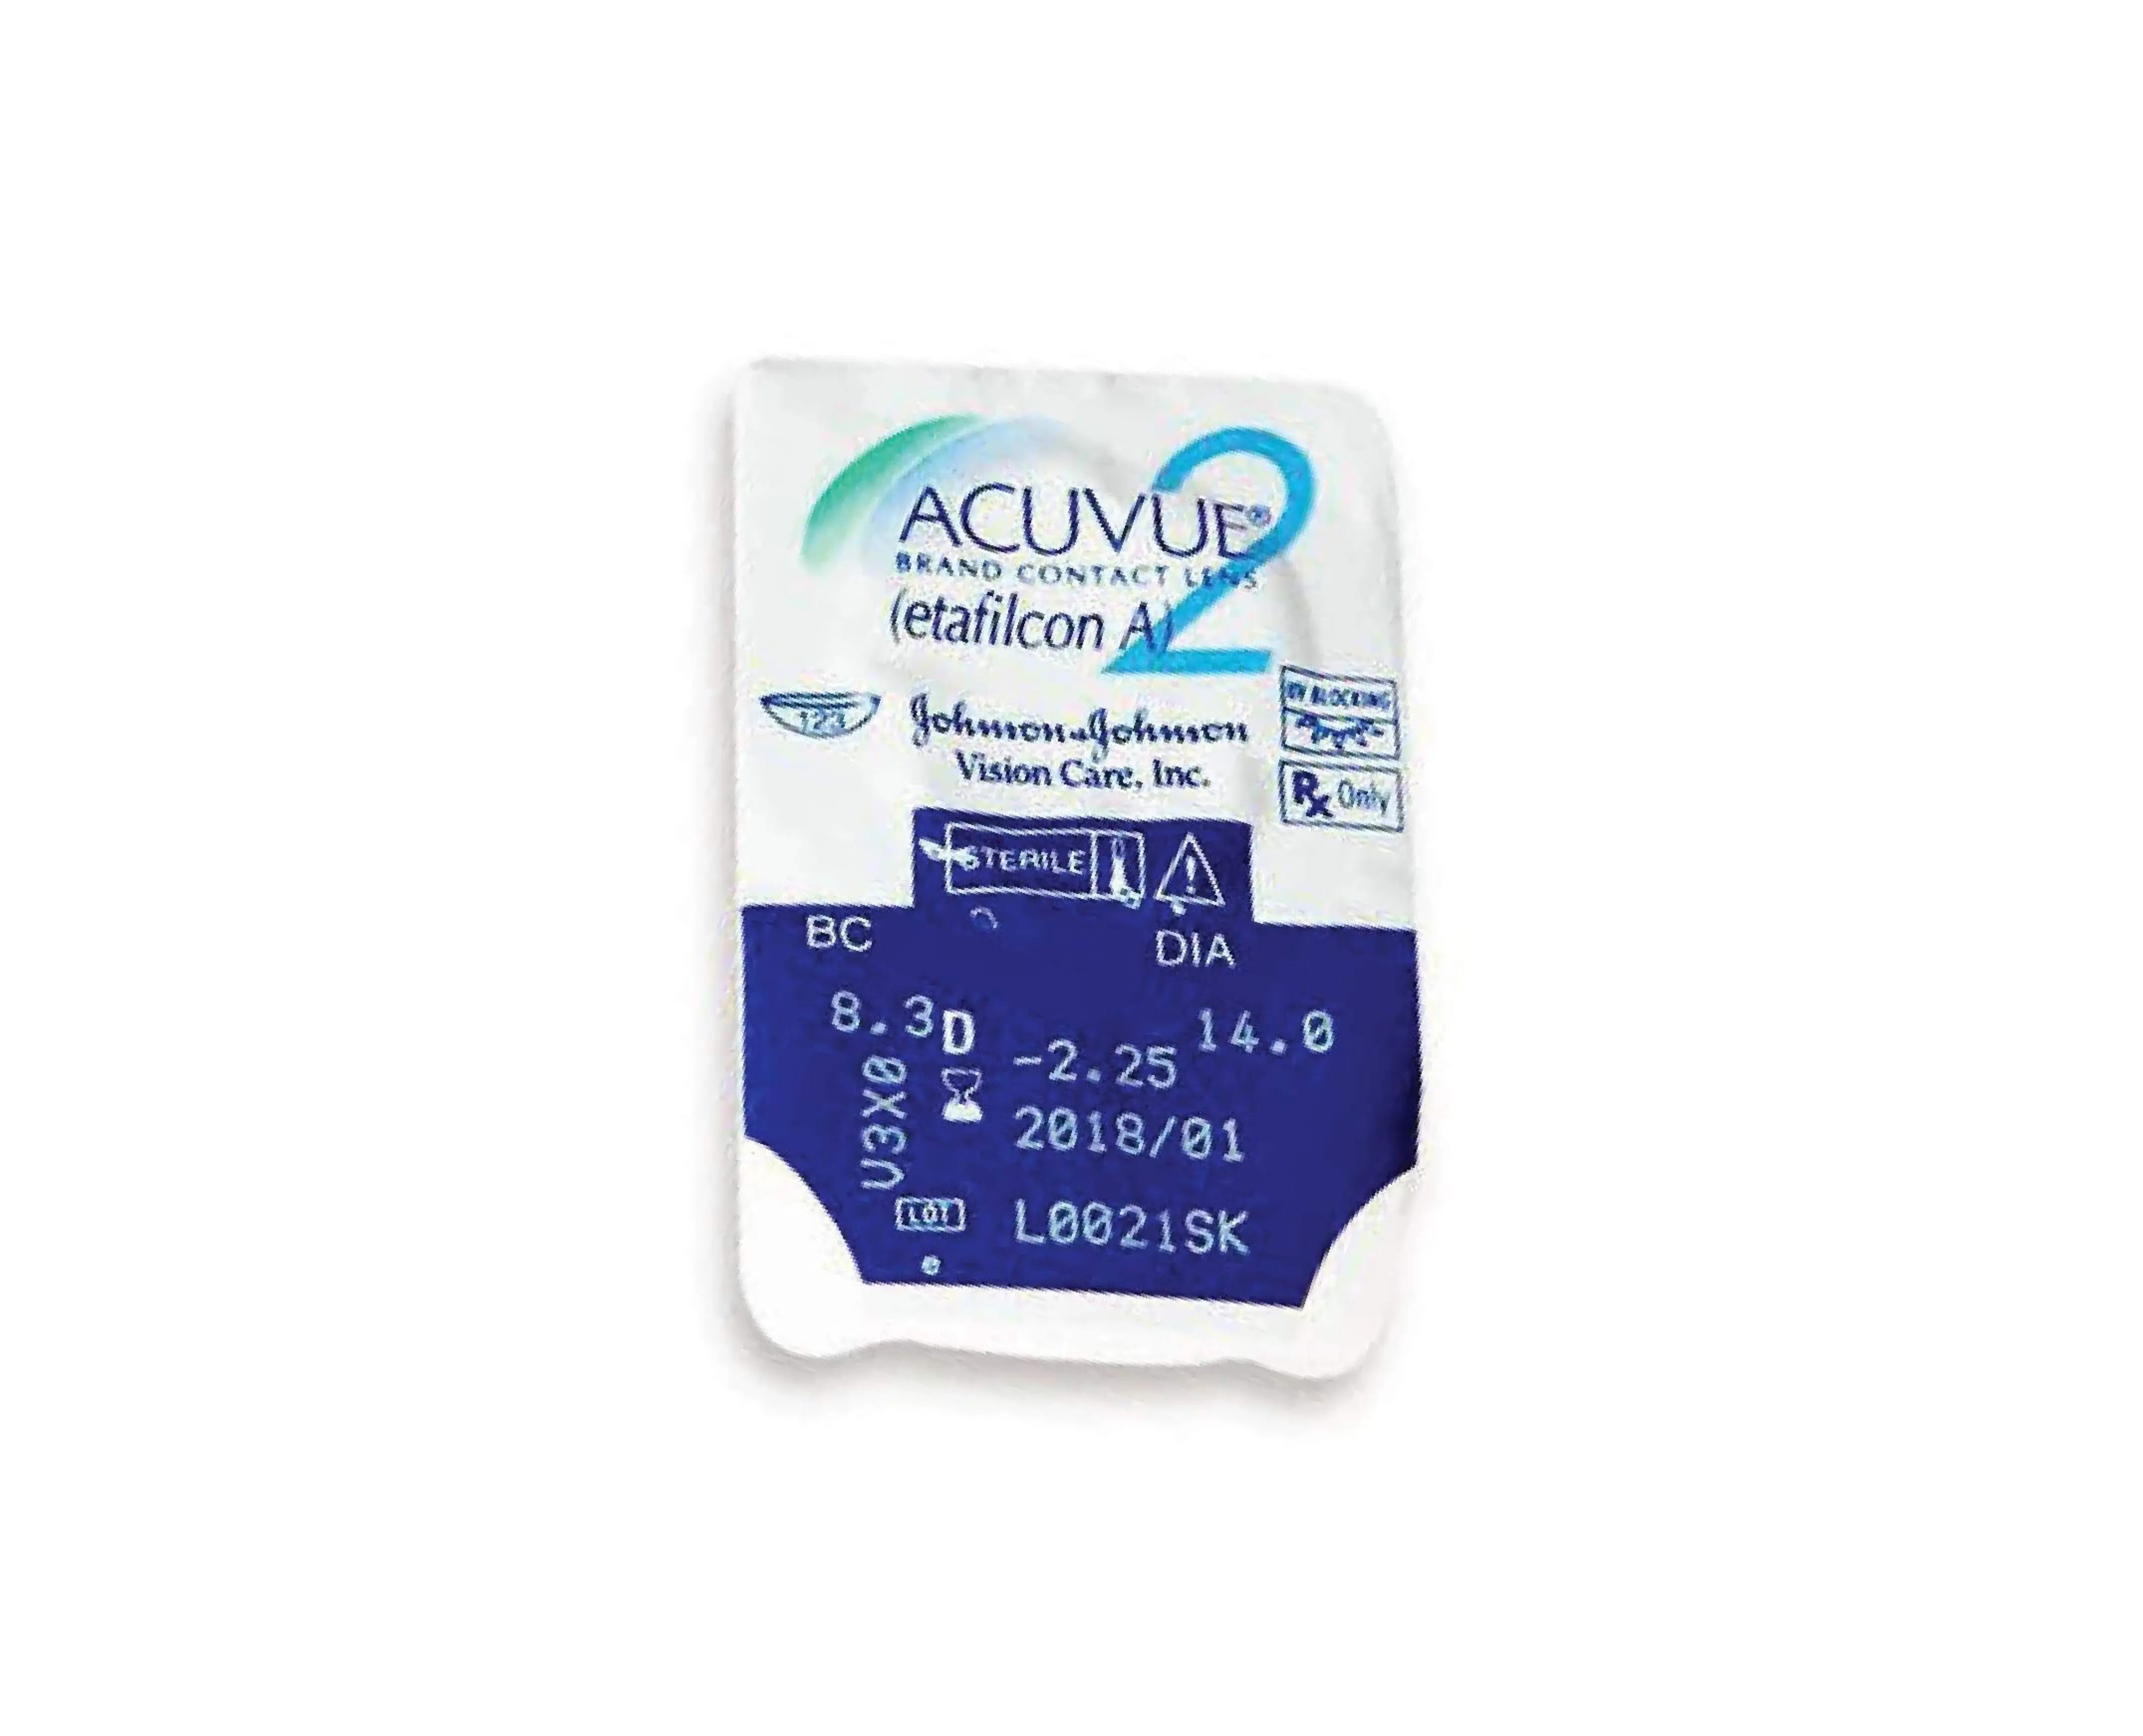 Acuvue 2 contact lenses 